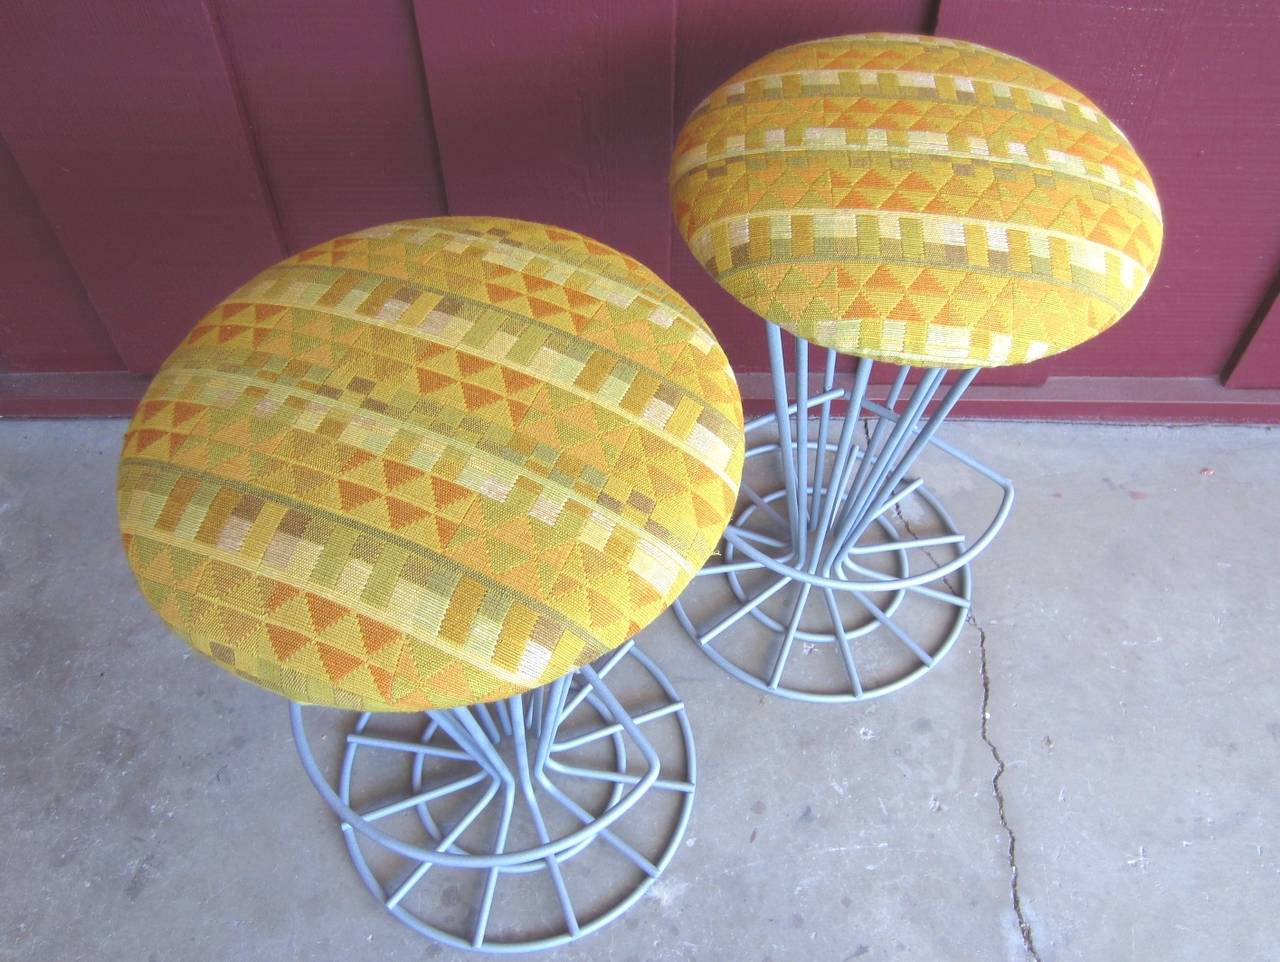 Pair of mid-century modern steel wire stools attributed to Frederick Weinberg with Alexander Girard fabric upholstered cushions.
These stools are sculpted of 3/8